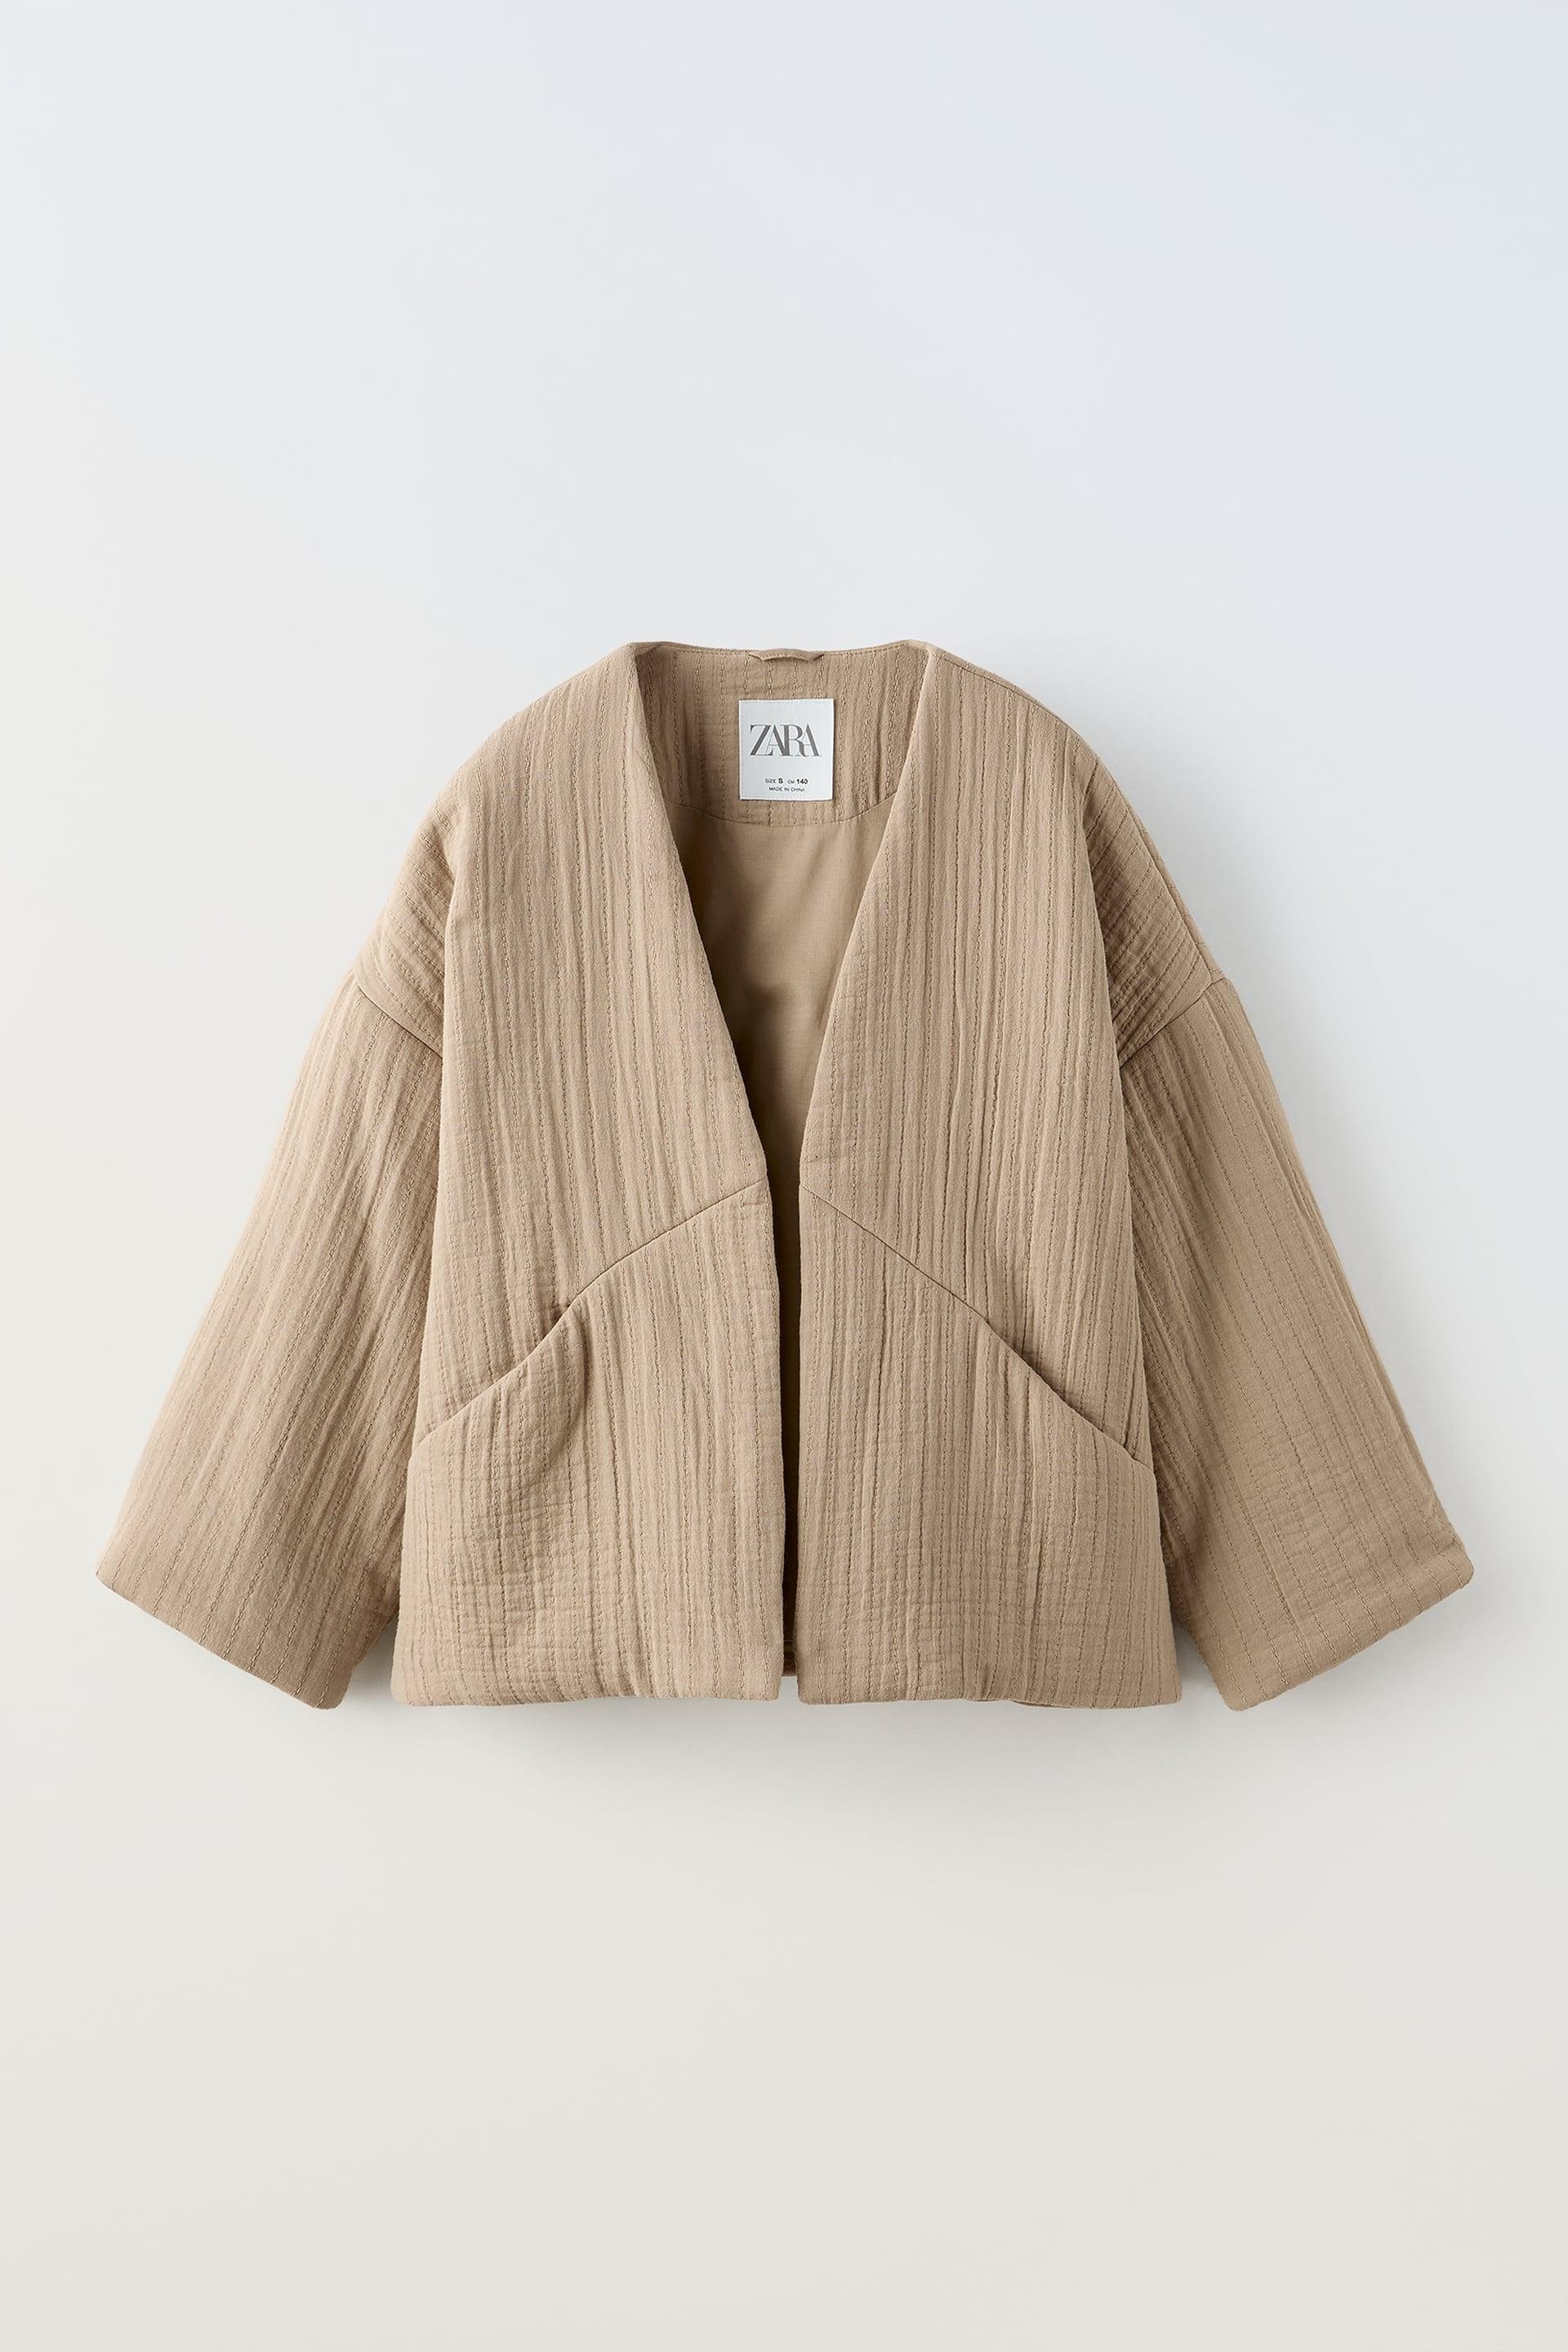 TOPSTITCHED QUILTED KIMONO by ZARA